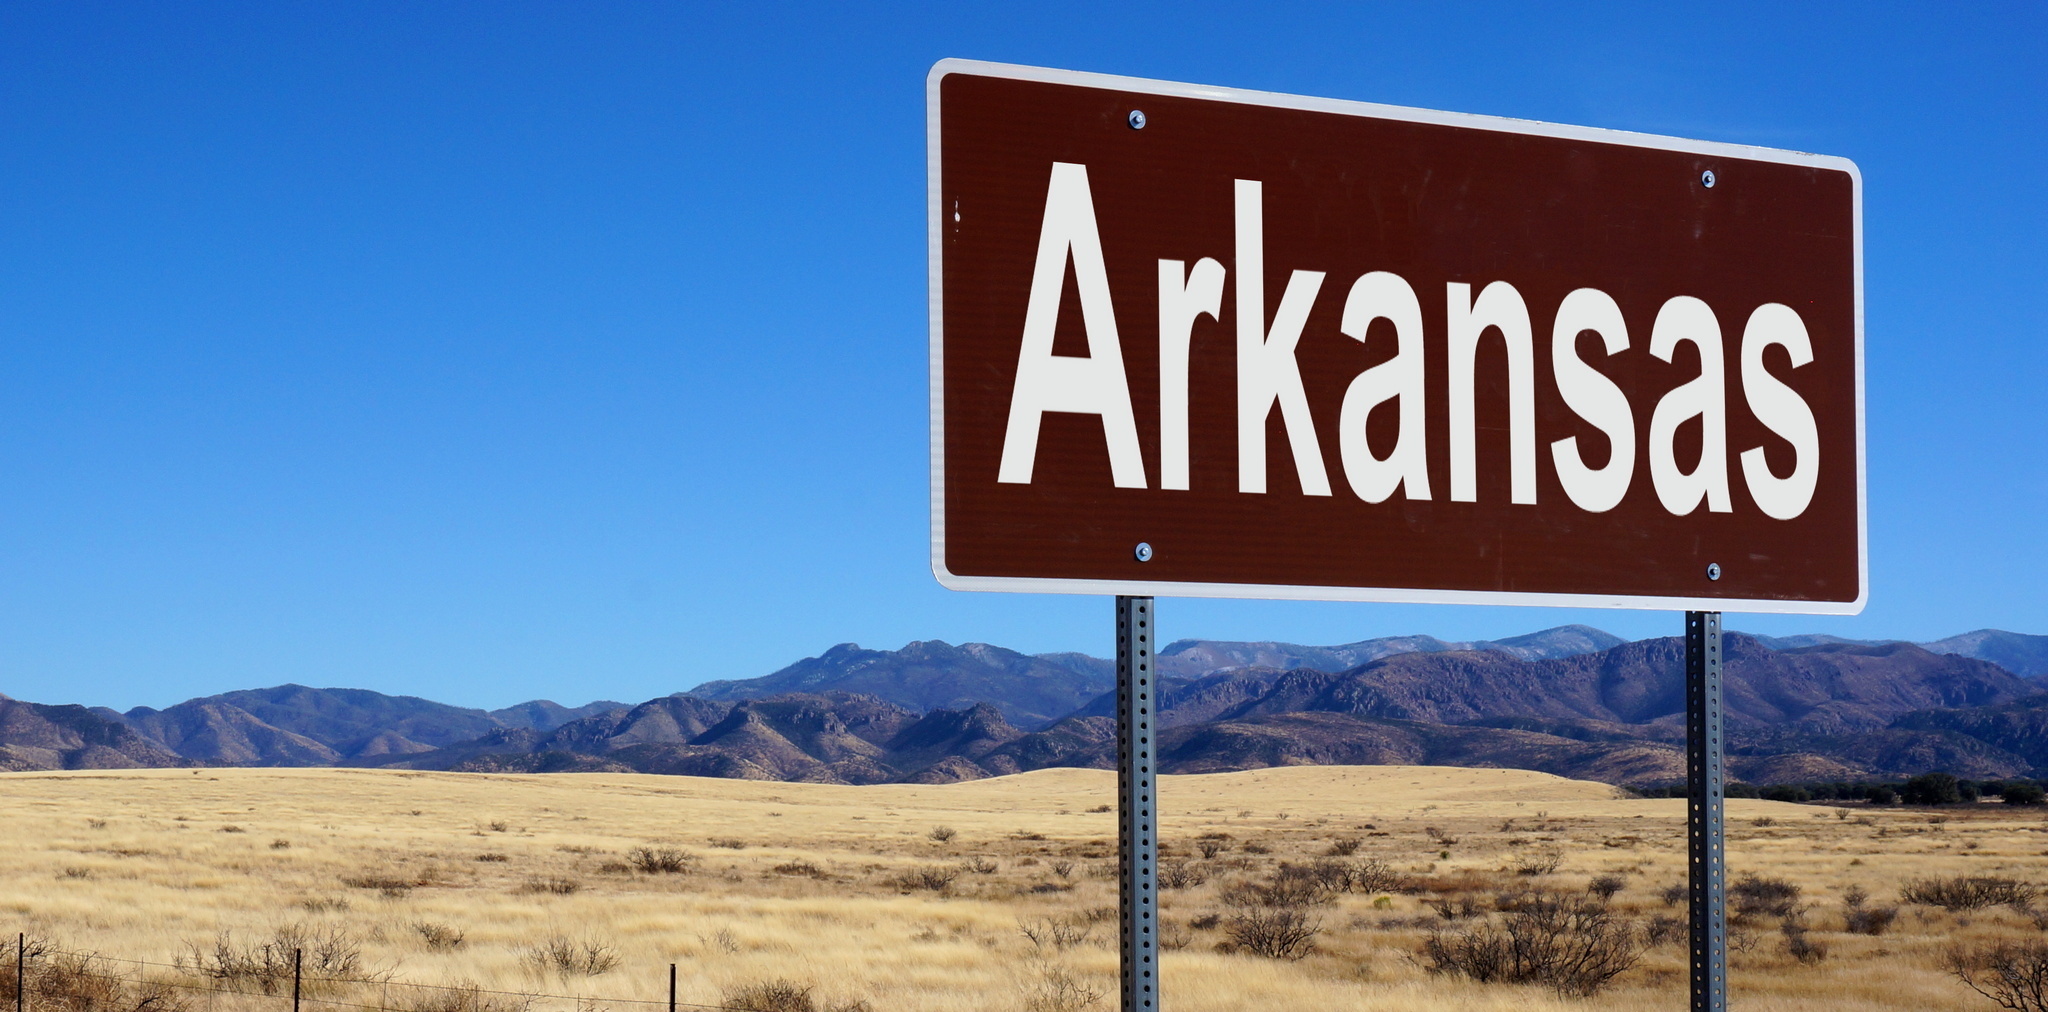 Highway sign showing the name Arkansas with mountains and field in the background.